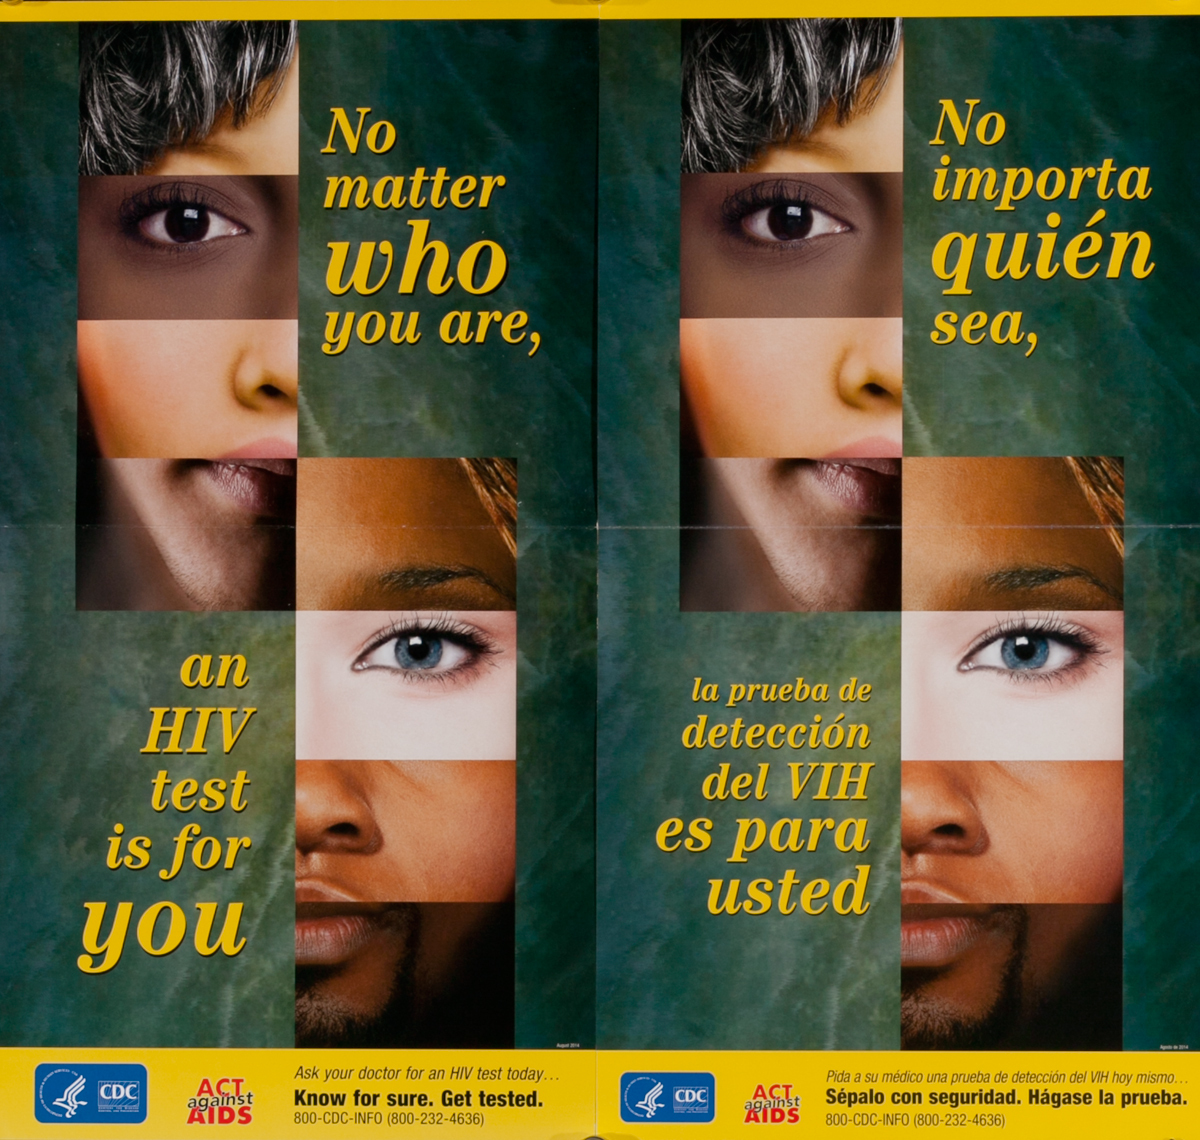 No matter who you are, an HIV test is for you, Original Centers for Disease Control and Prevention Health Poster